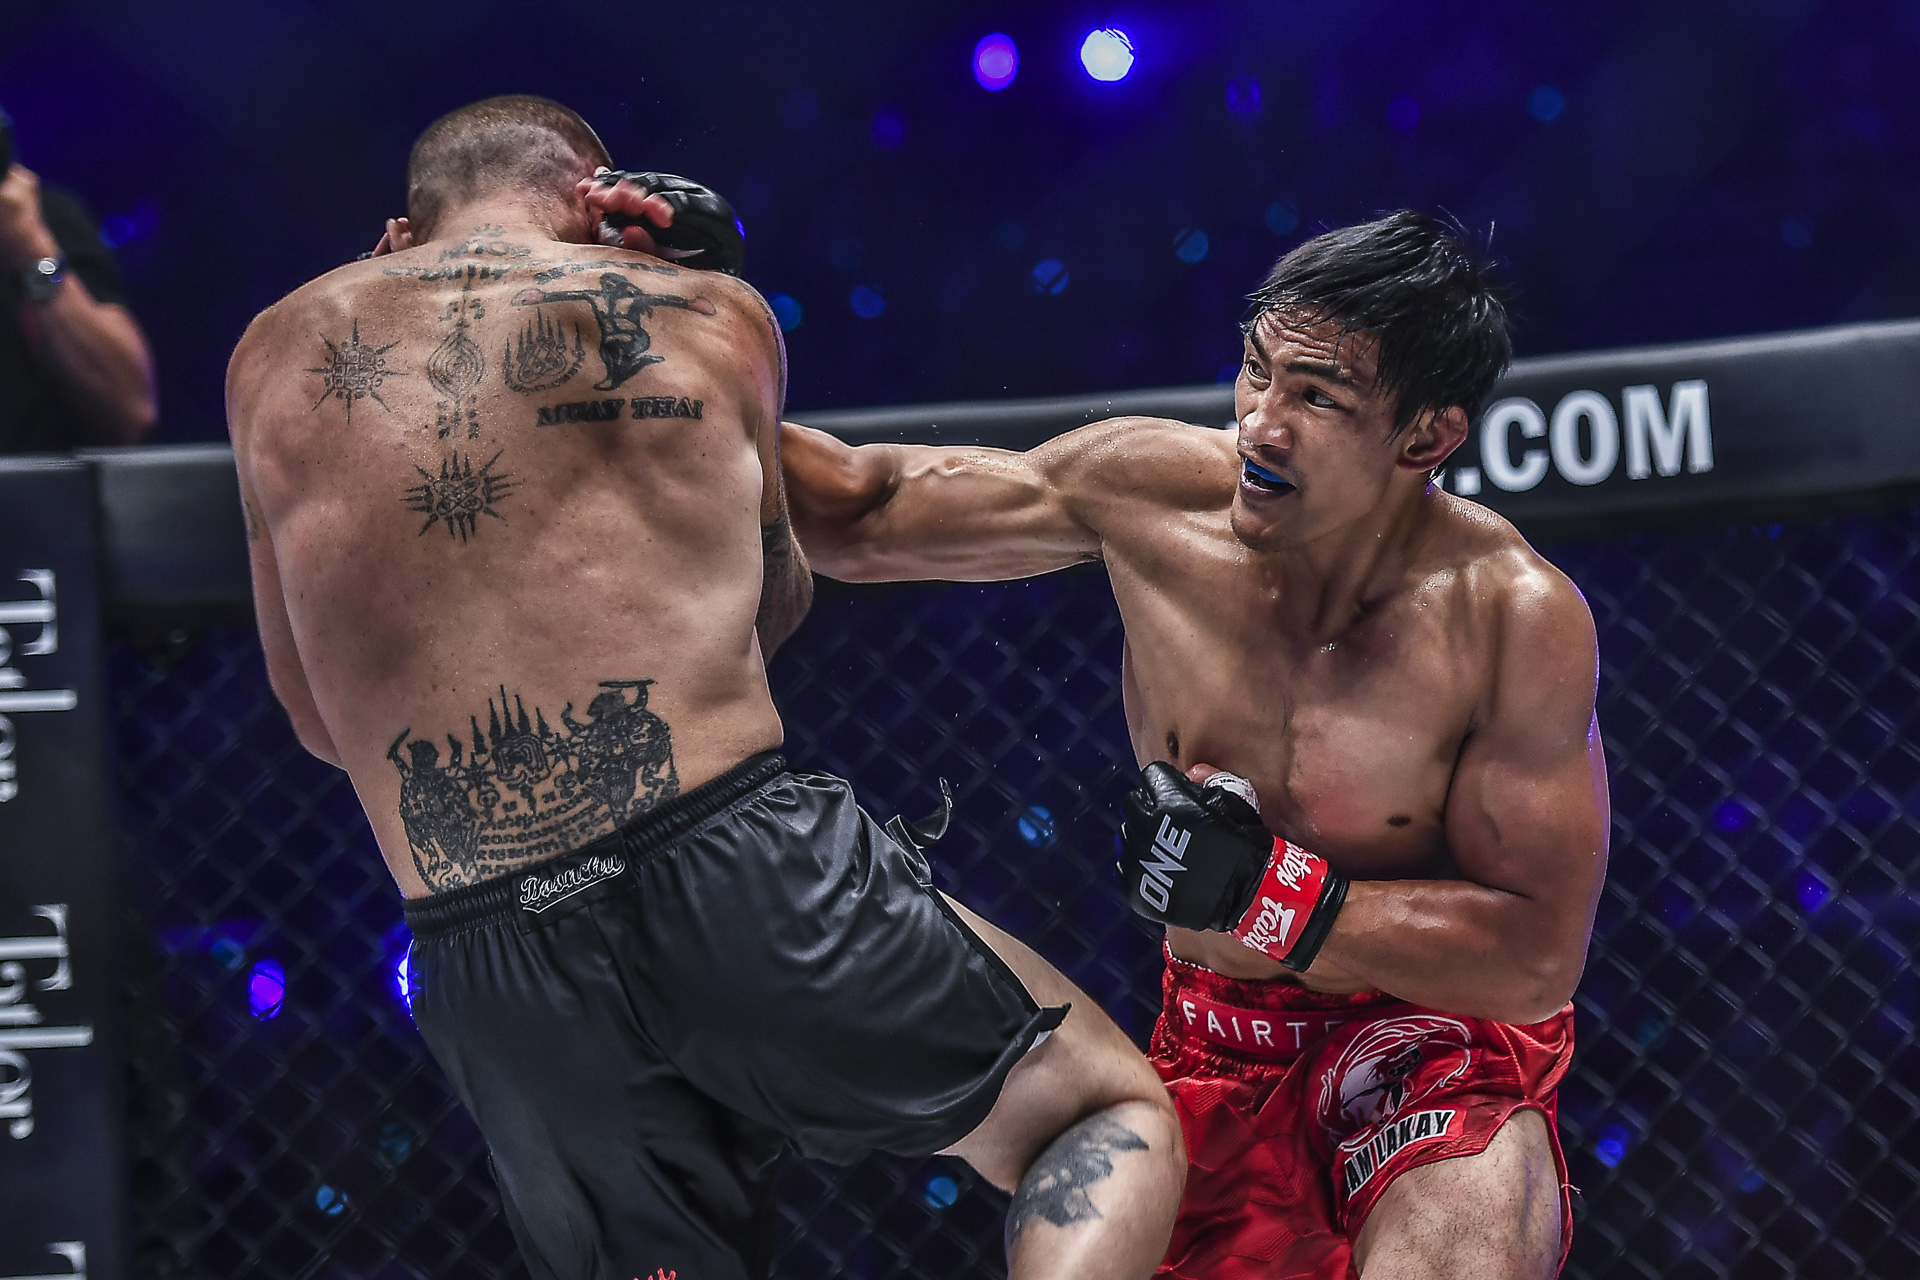 Folayang wins in Muay Thai debut, spoils Parr's farewell